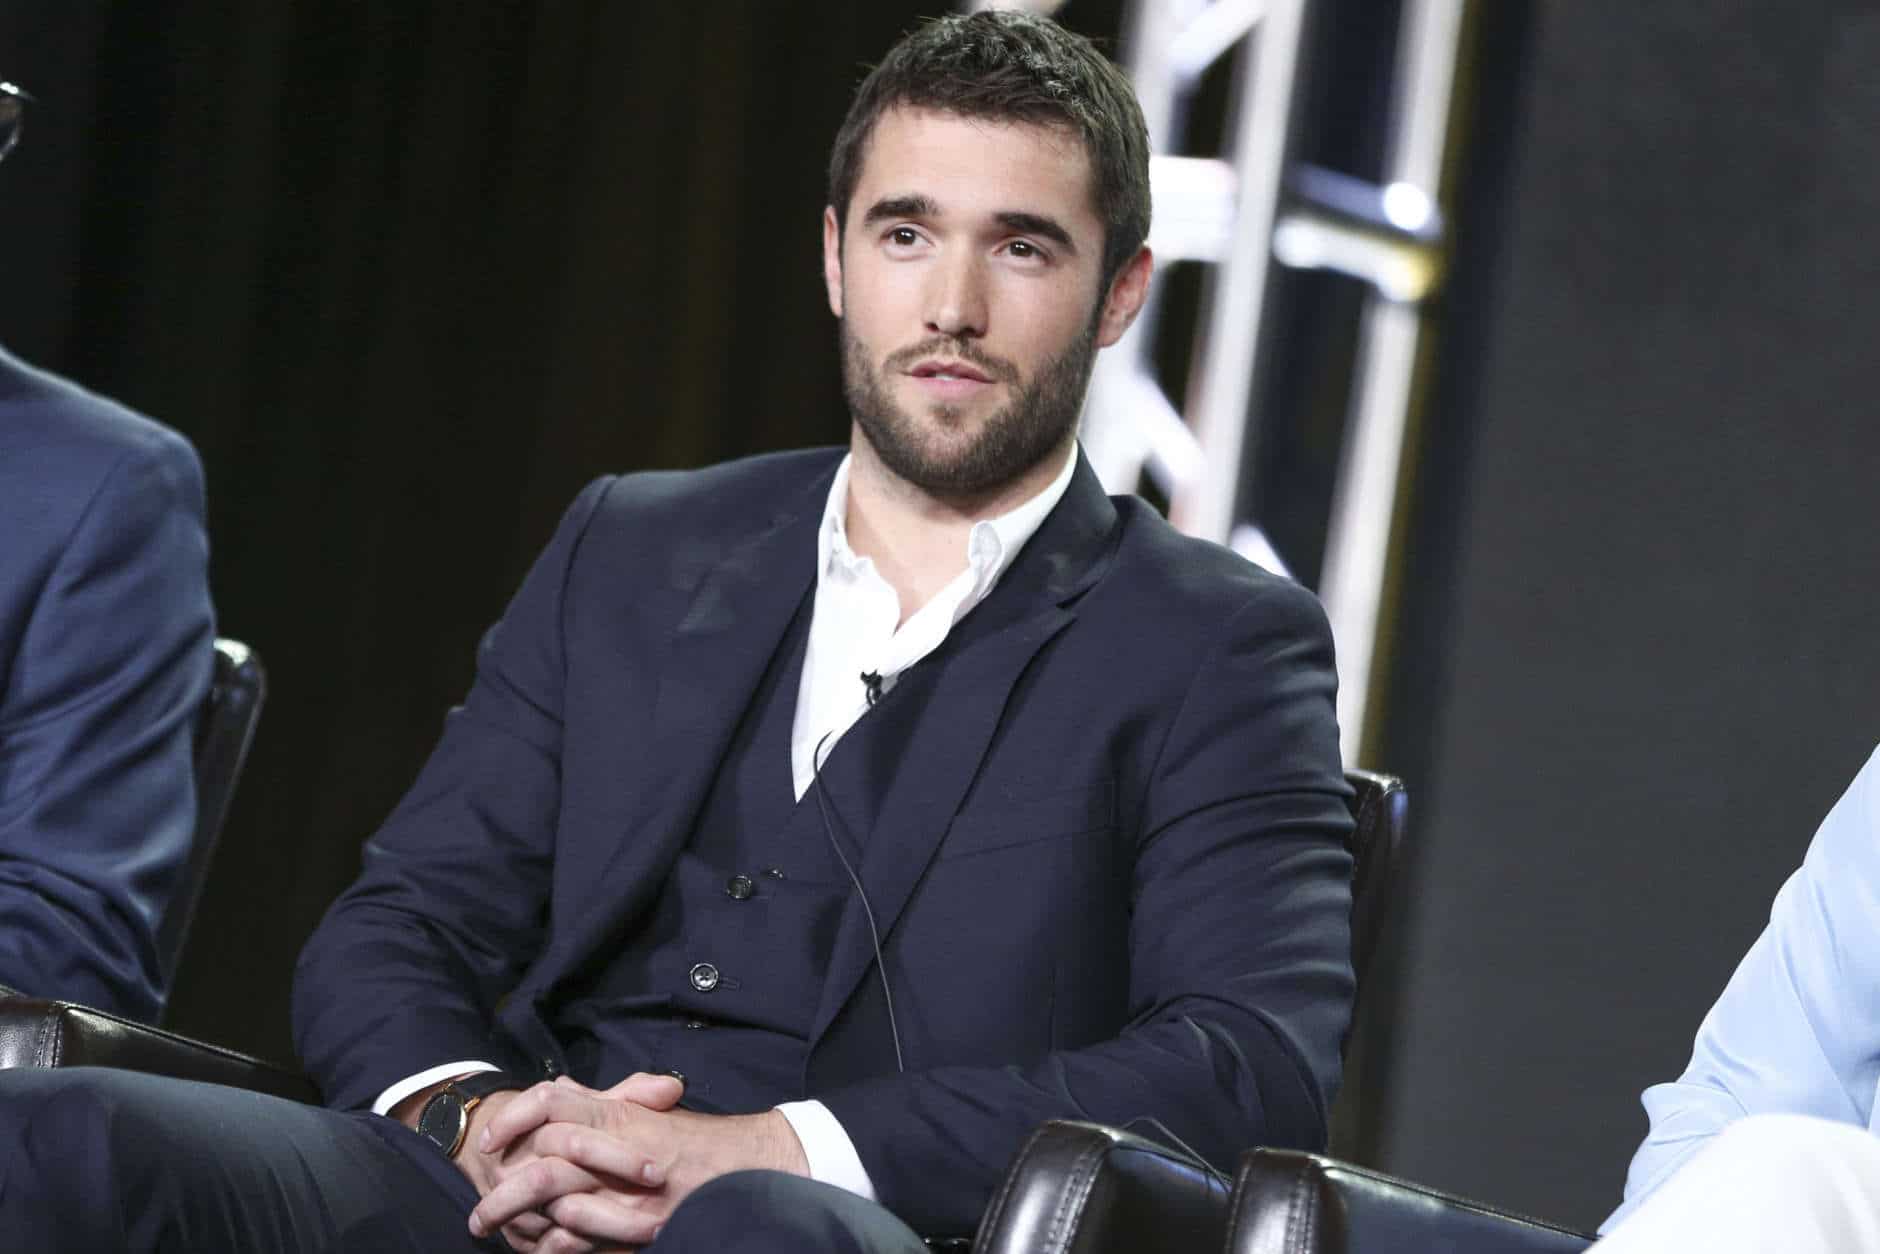 Josh Bowman speaks at the "Time After Time" panel at the Disney/ABC portion of the 2017 Winter Television Critics Association press tour on Tuesday, Jan. 10, 2017, in Pasadena, Calif. (Photo by Rich Fury/Invision/AP)